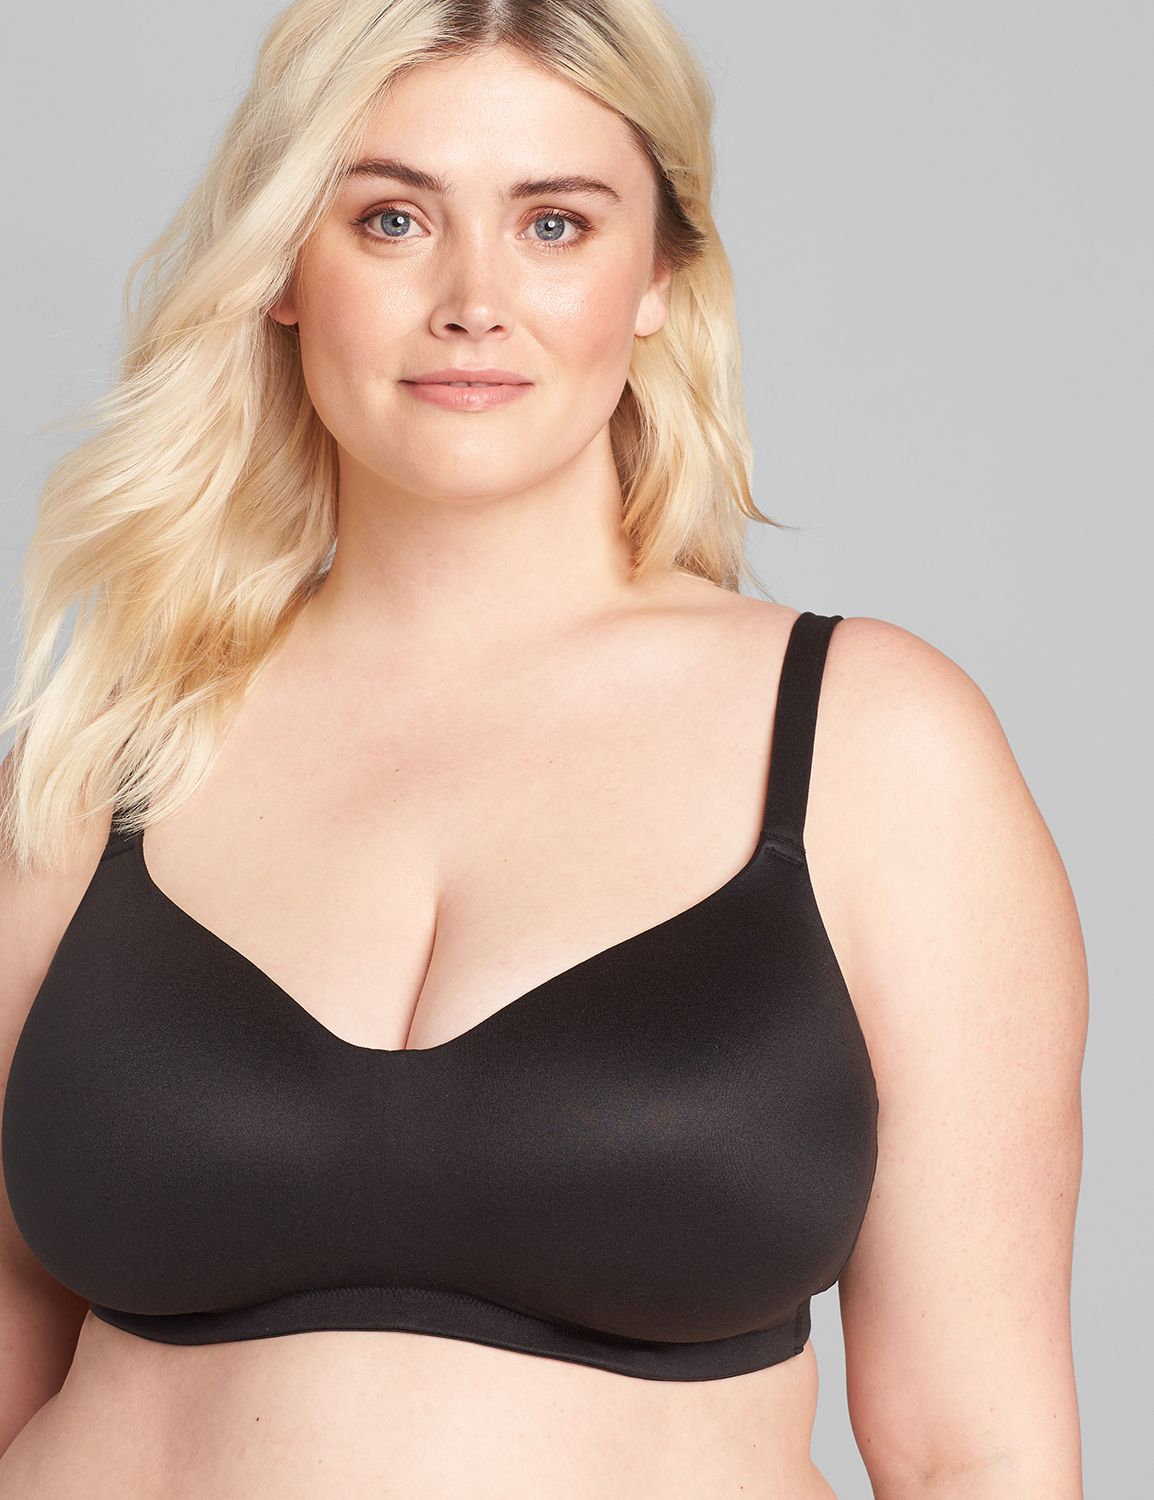 Cacique LANE Bryant Women's bras size 44 F in Black NWT - $23 New With Tags  - From Ange